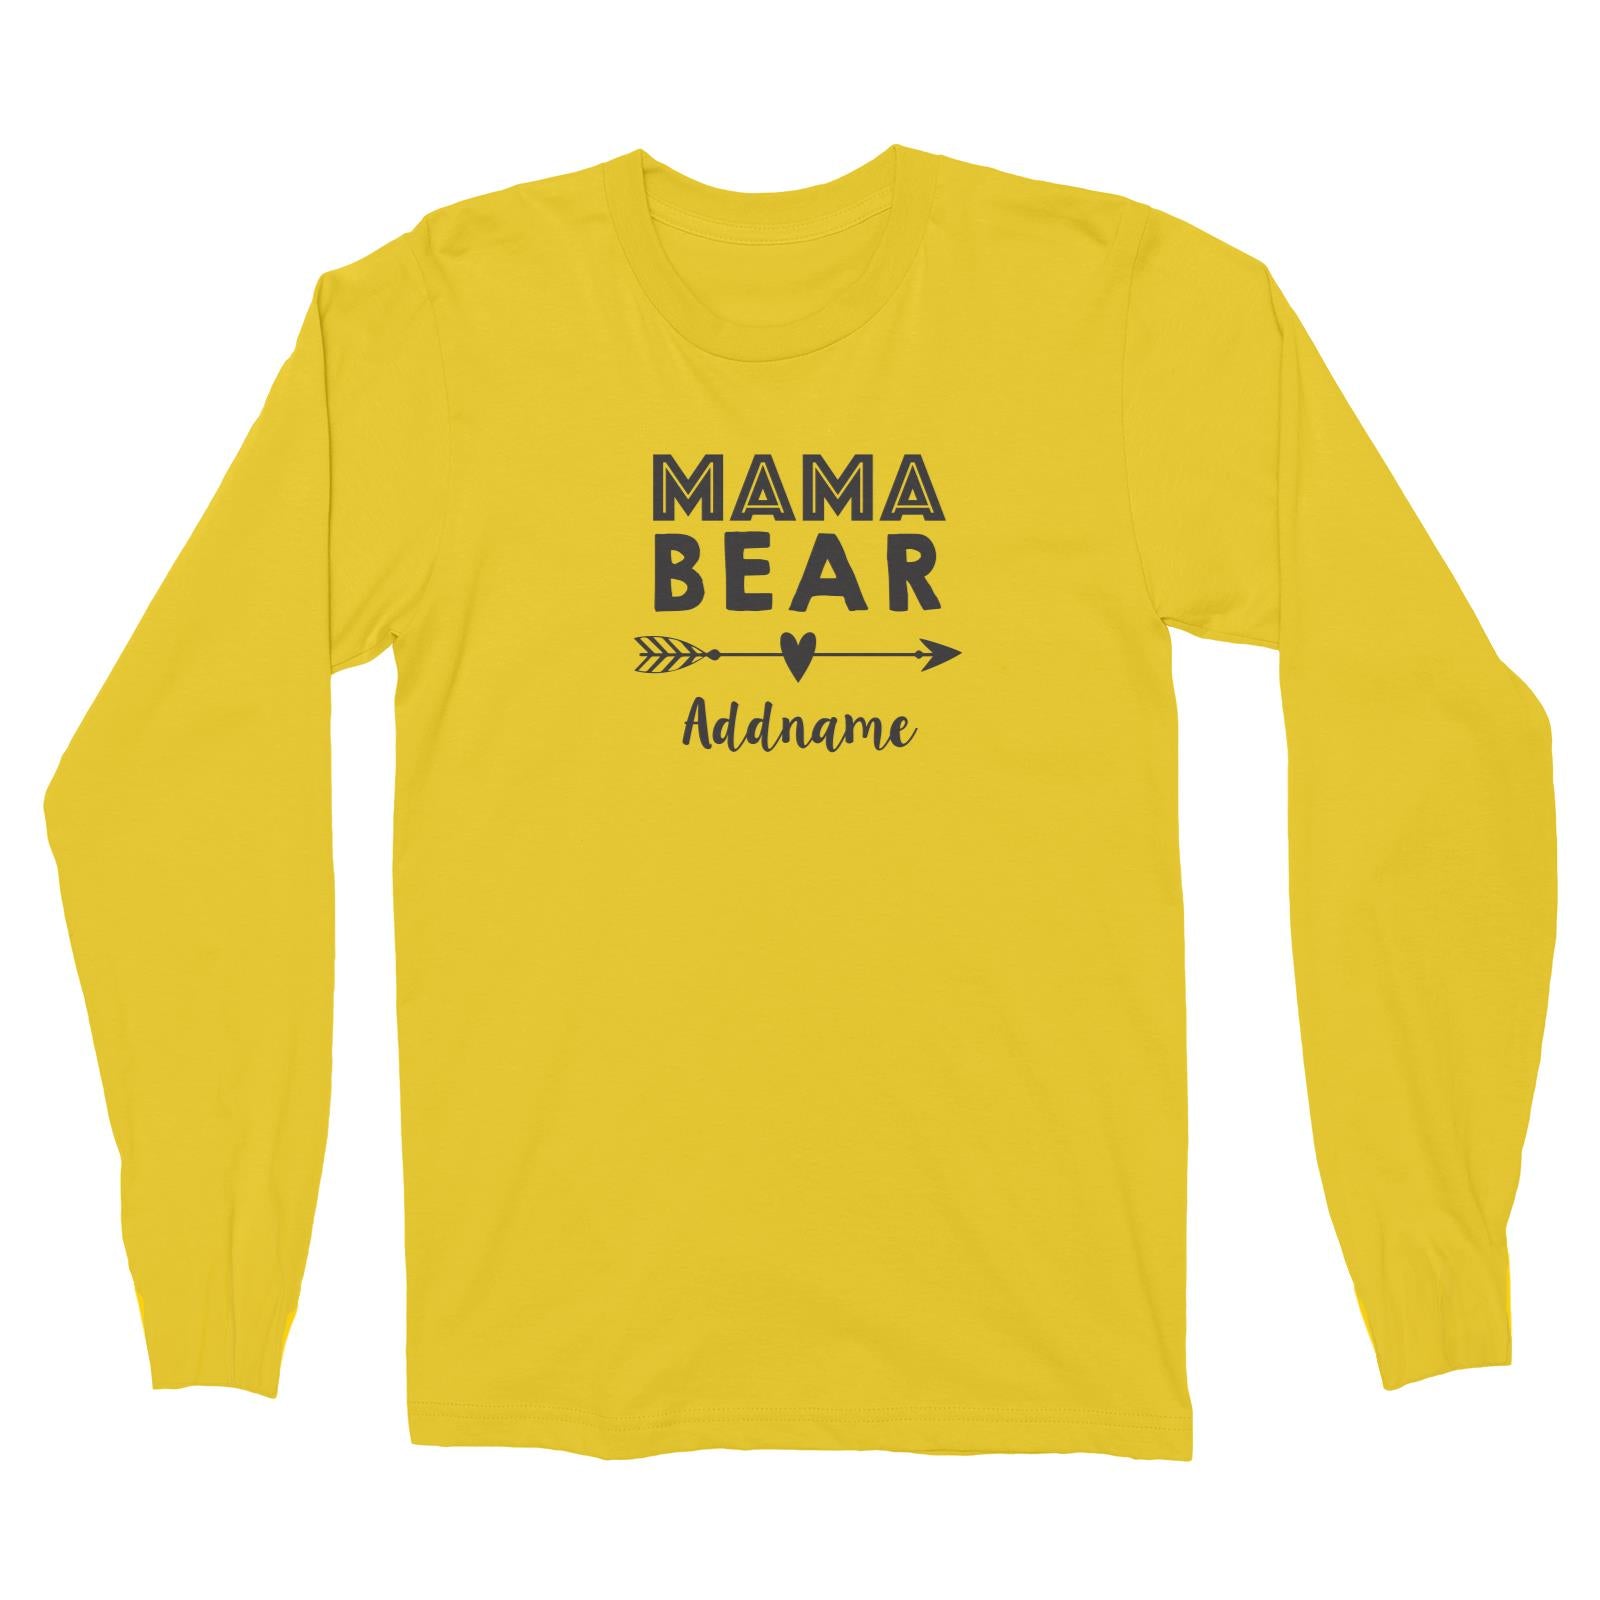 Mama Bear Addname Long Sleeve Unisex T-Shirt  Matching Family Personalizable Designs